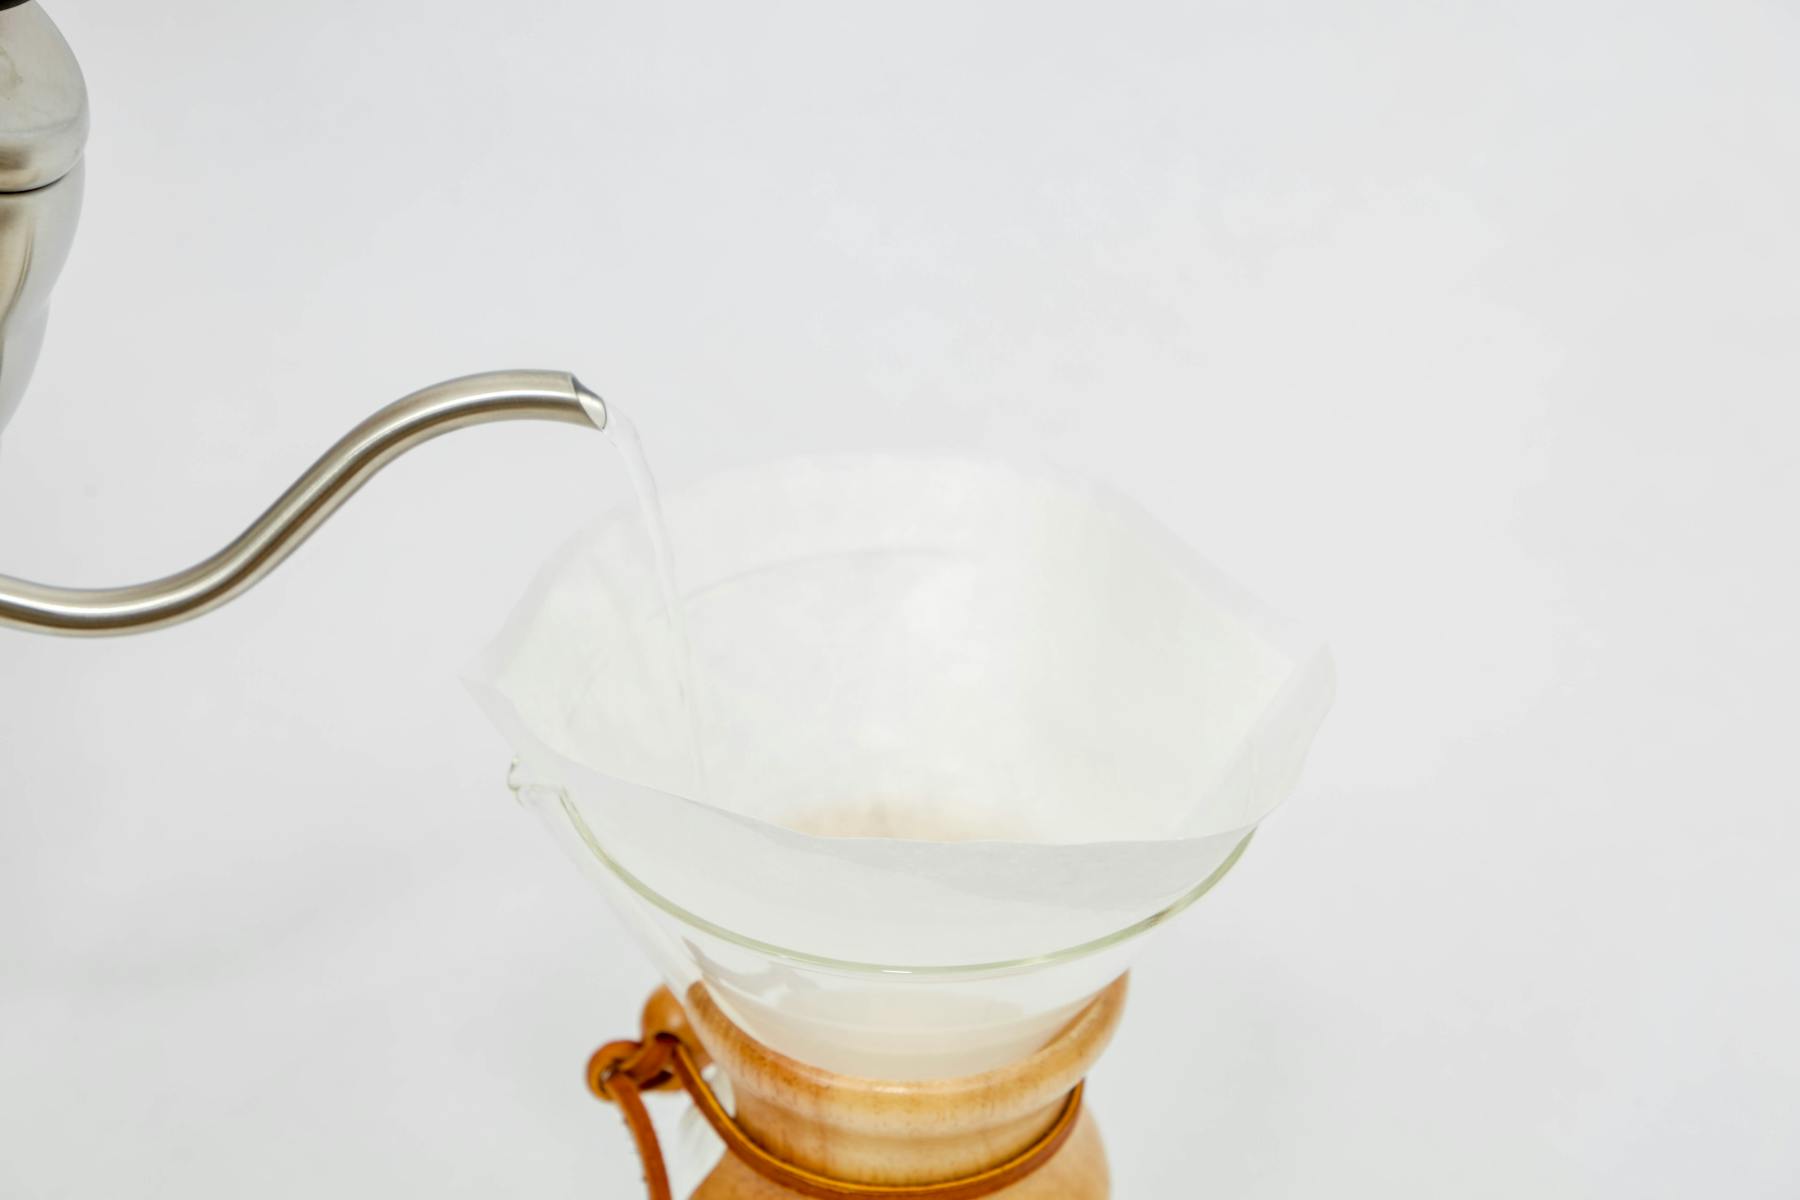 Place the filter paper in the chemex